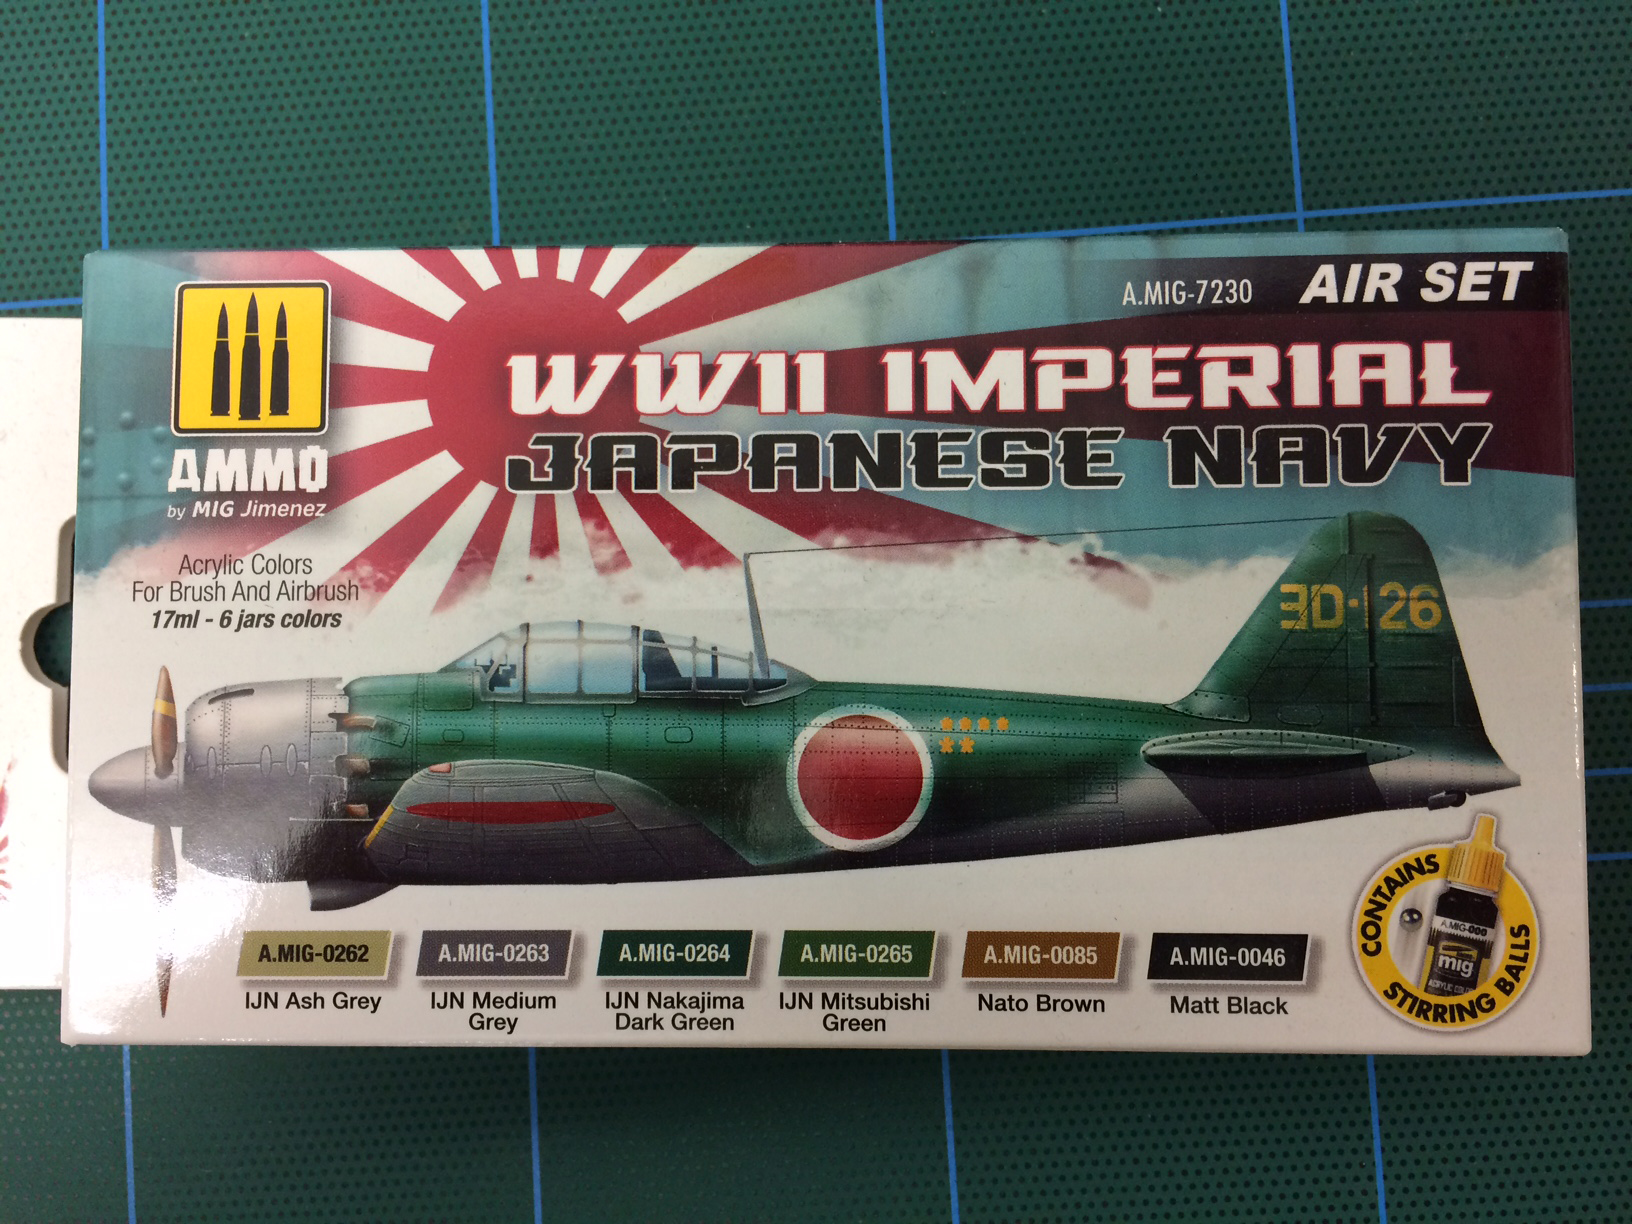 MIG7230 WWII JAPANESE NAVY AIR SET